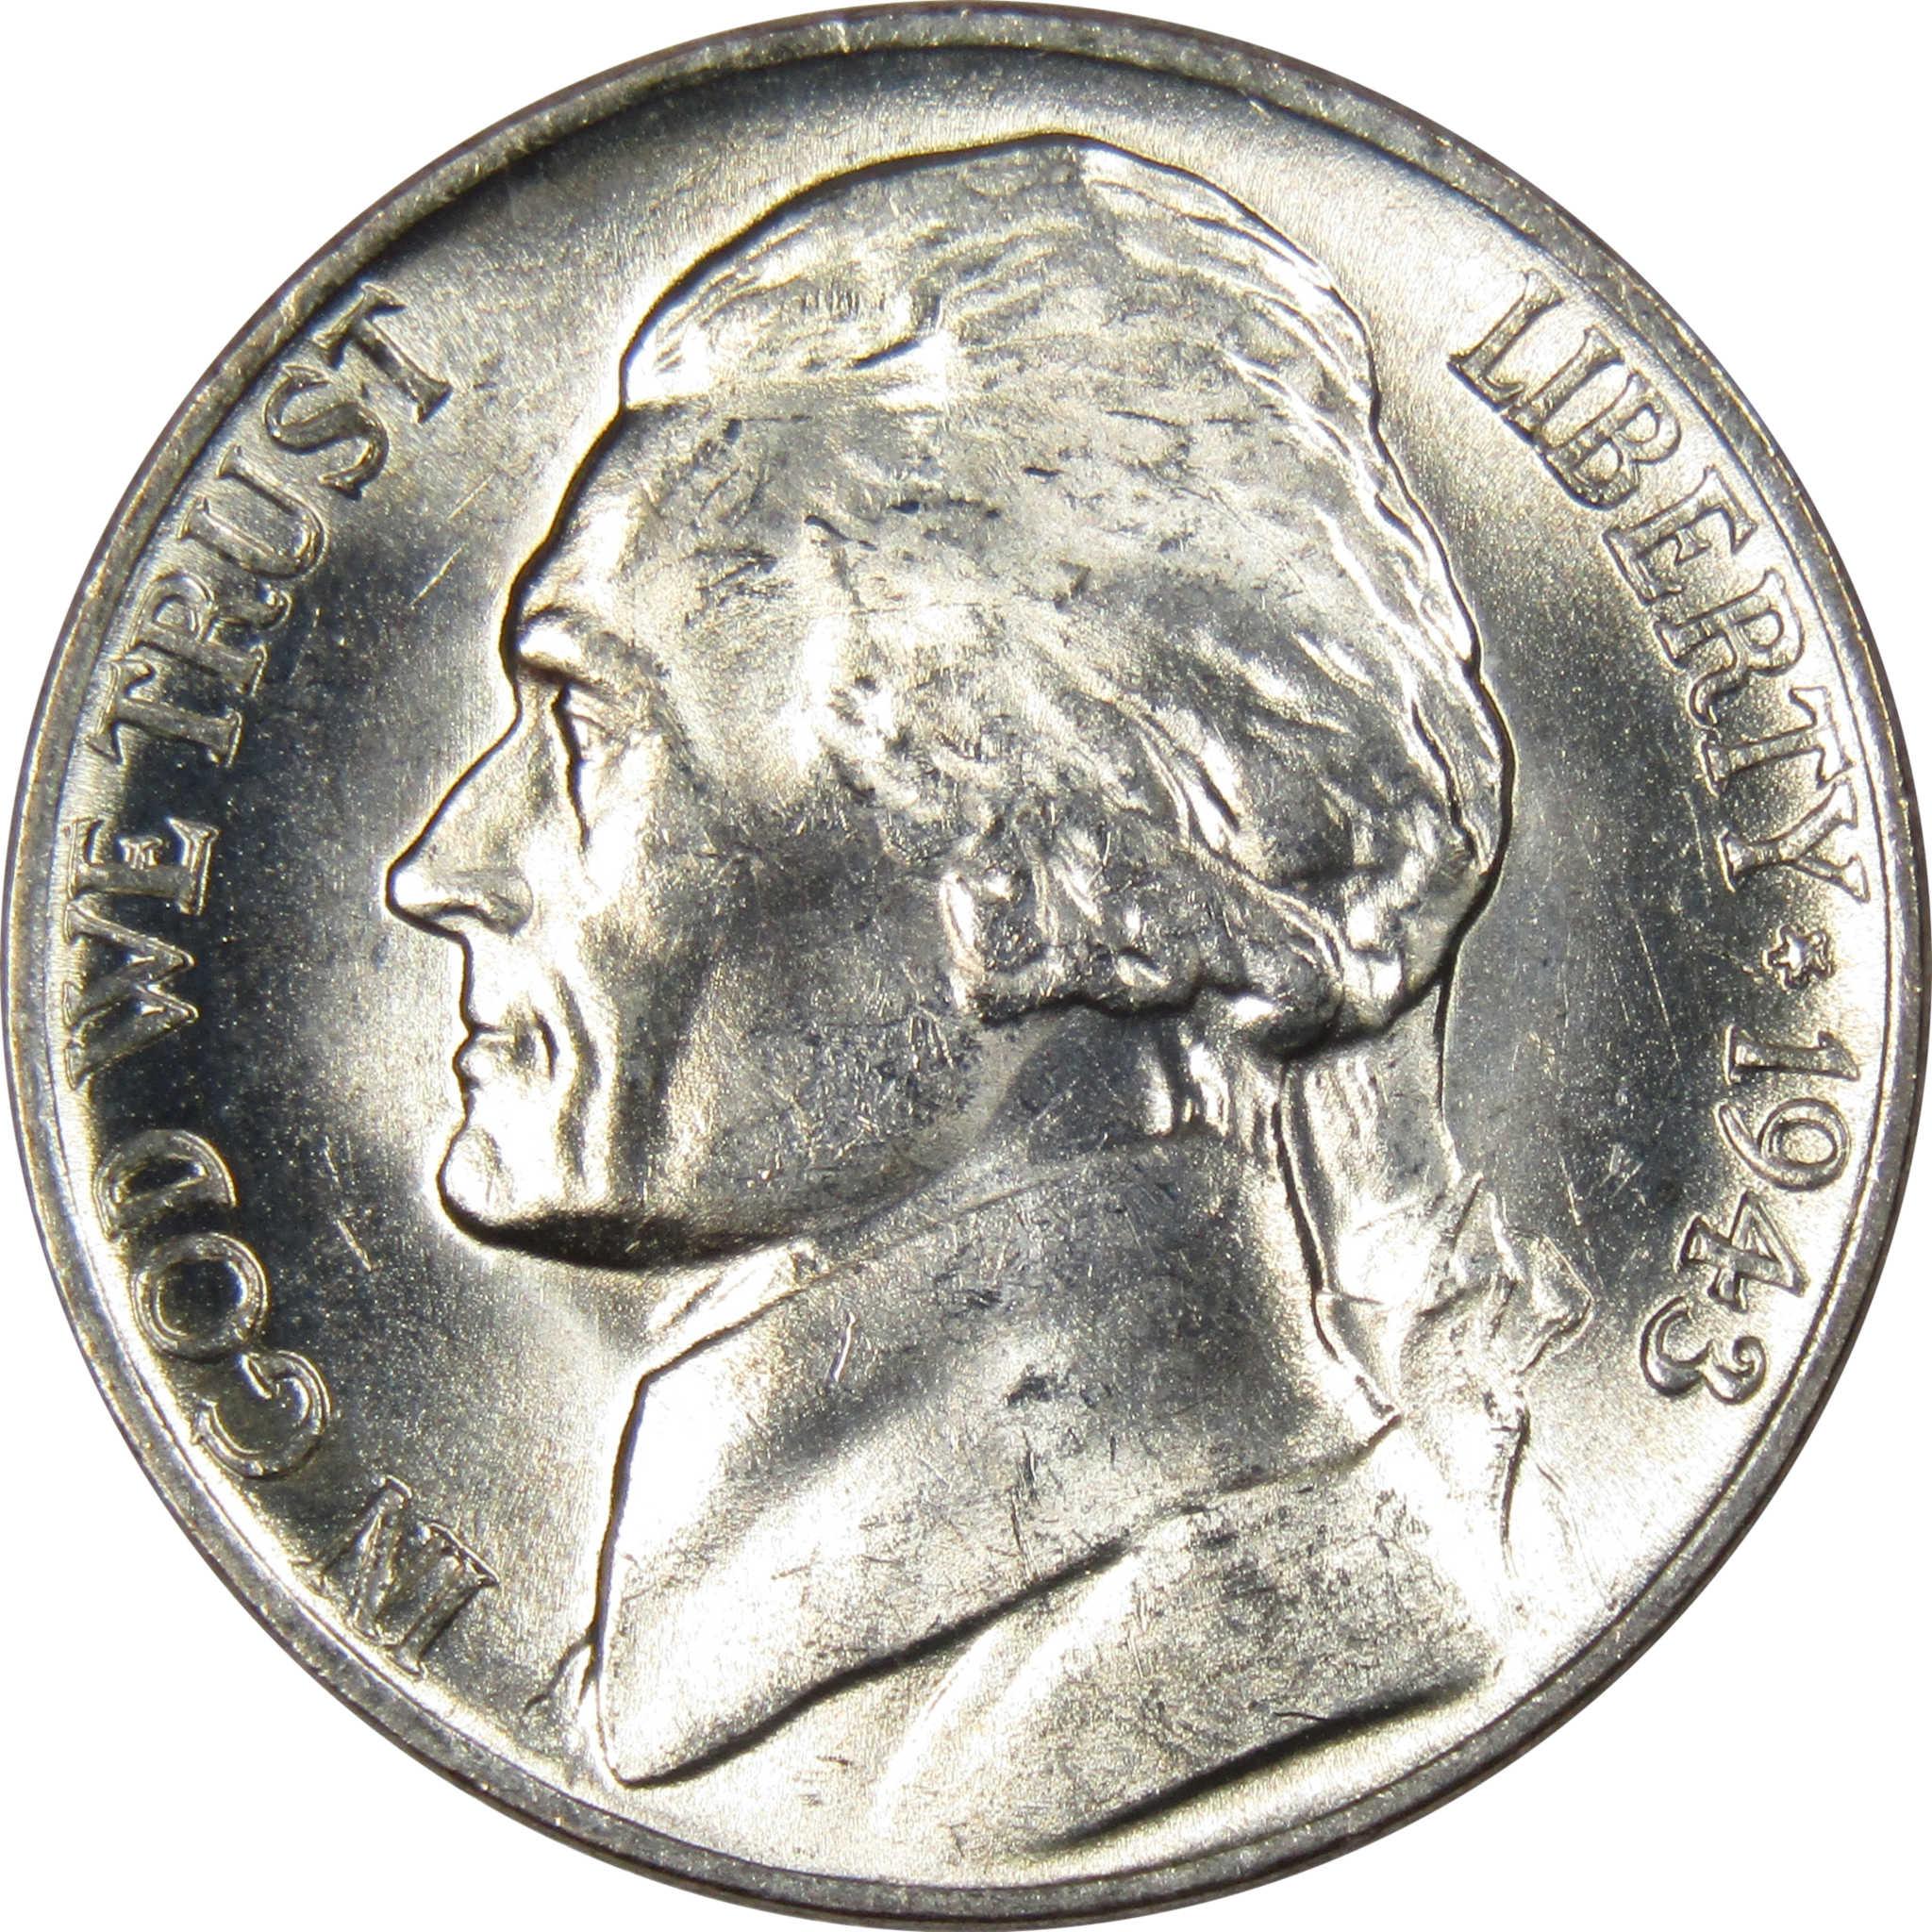 1943 P Jefferson Wartime Nickel BU Uncirculated Mint State 35% Silver 5c US Coin